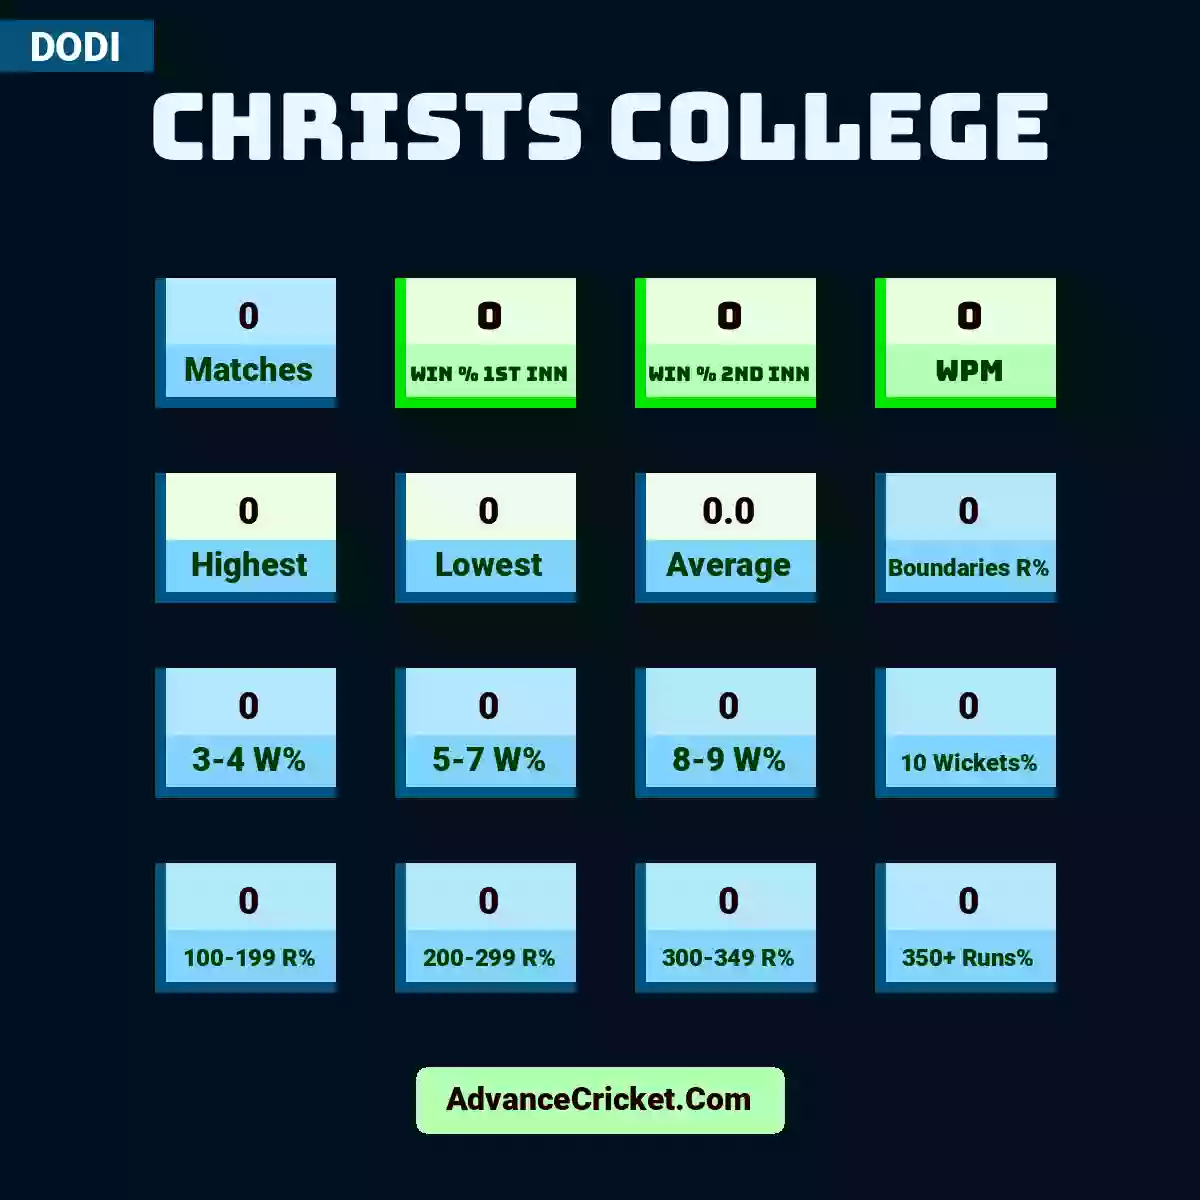 Image showing Christs College with Matches: 0, Win % 1st Inn: 0, Win % 2nd Inn: 0, WPM: 0, Highest: 0, Lowest: 0, Average: 0.0, Boundaries R%: 0, 3-4 W%: 0, 5-7 W%: 0, 8-9 W%: 0, 10 Wickets%: 0, 100-199 R%: 0, 200-299 R%: 0, 300-349 R%: 0, 350+ Runs%: 0.